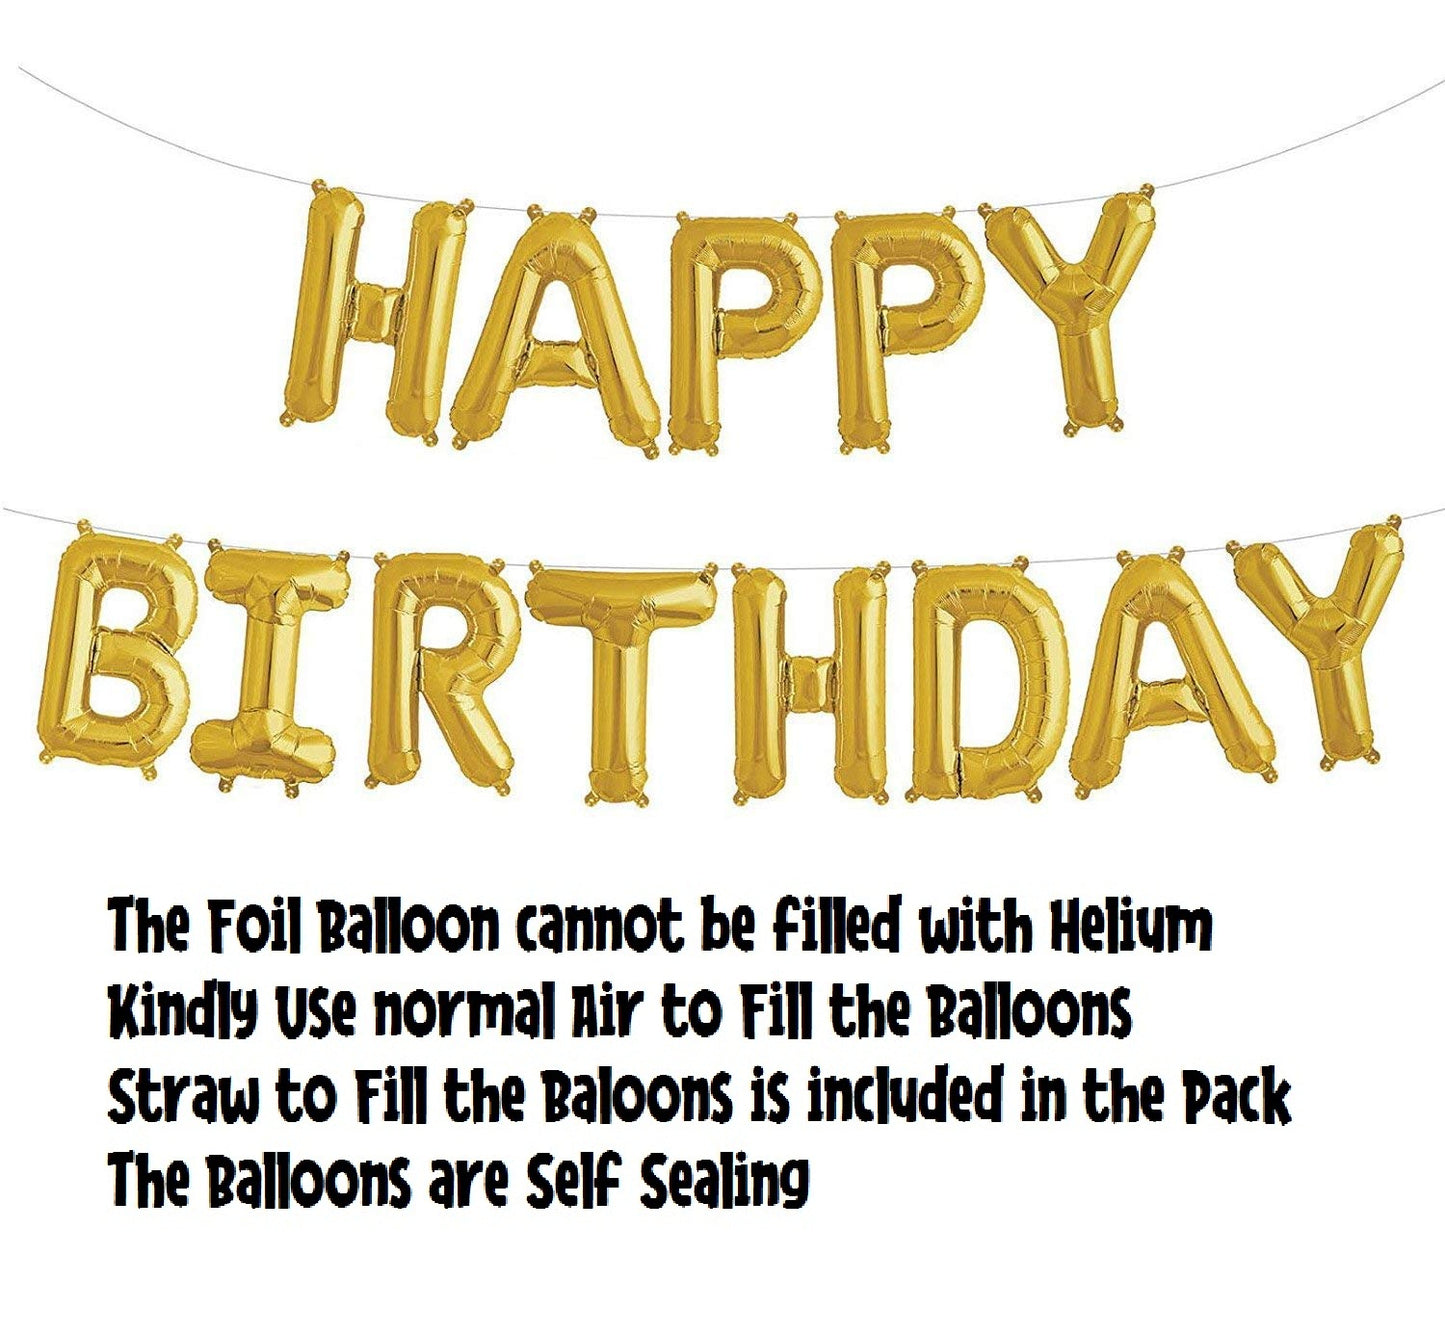 Happy 60th Birthday Foil Balloon Combo Party Decoration for Anniversary Celebration 16 Inches